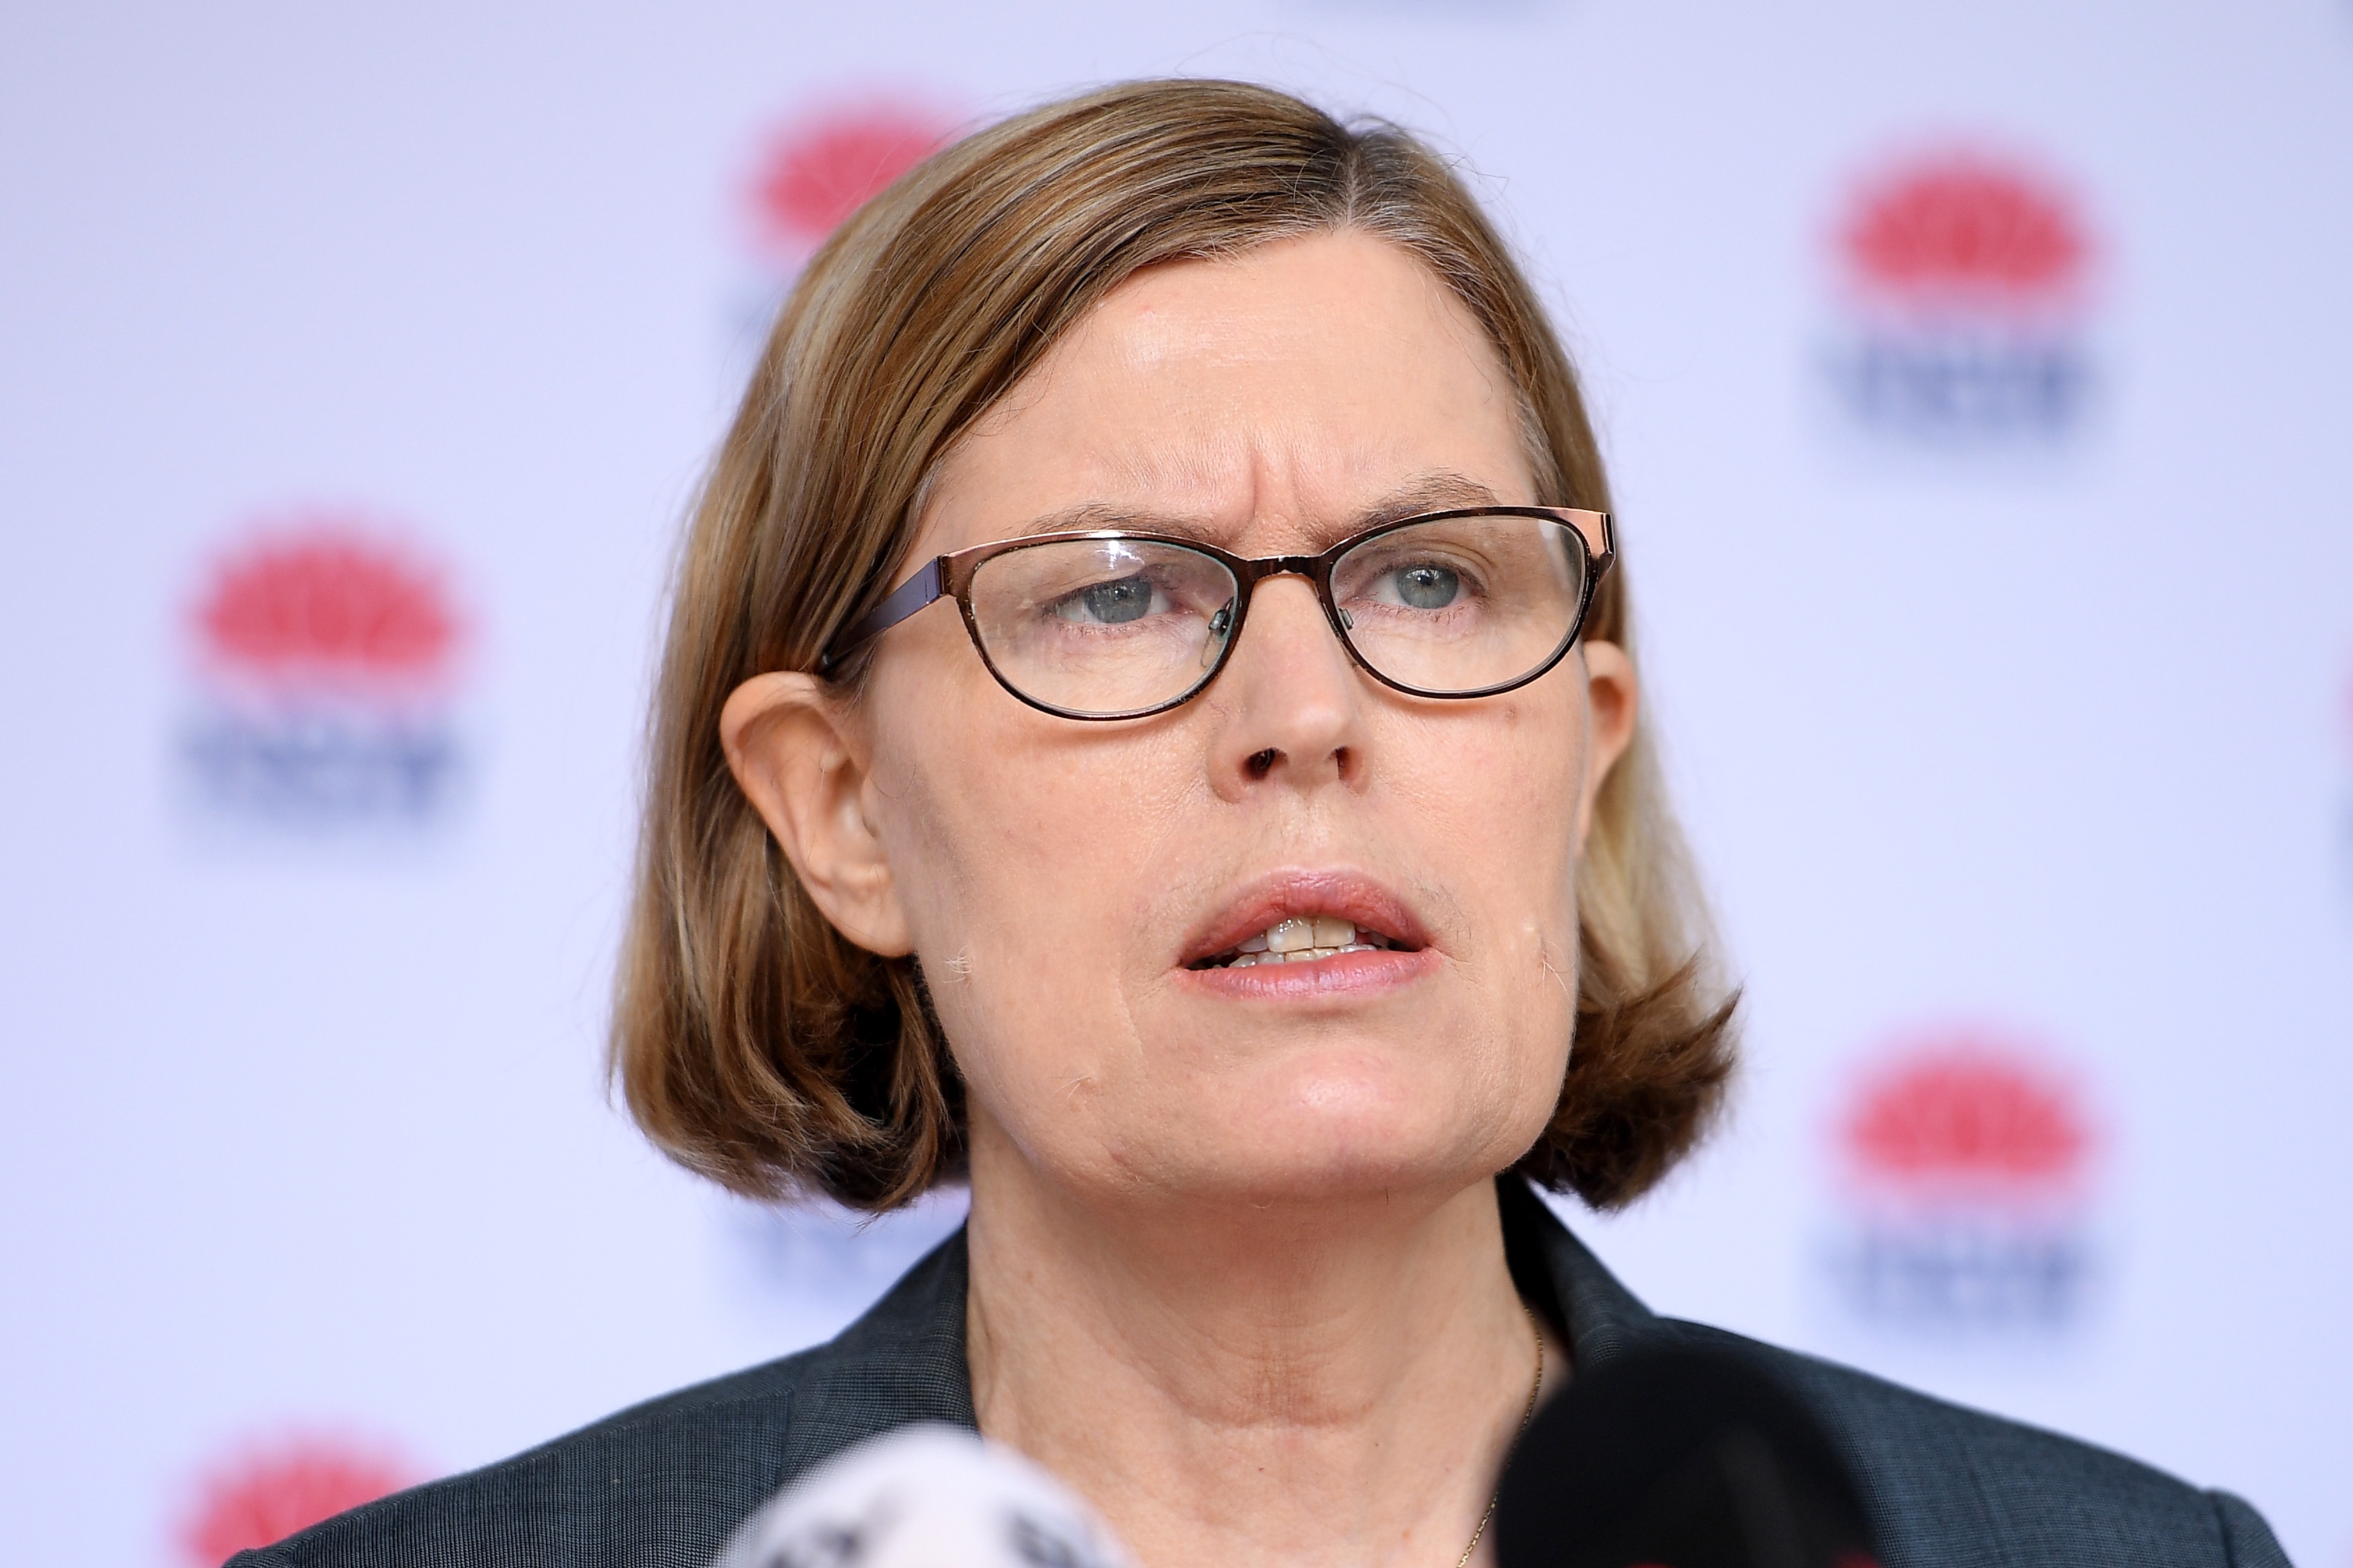 NSW Chief Health Officer Dr Kerry Chant addresses media during a press conference in Sydney, Friday, January 8, 2021. (AAP Image/Dan Himbrechts) NO ARCHIVING